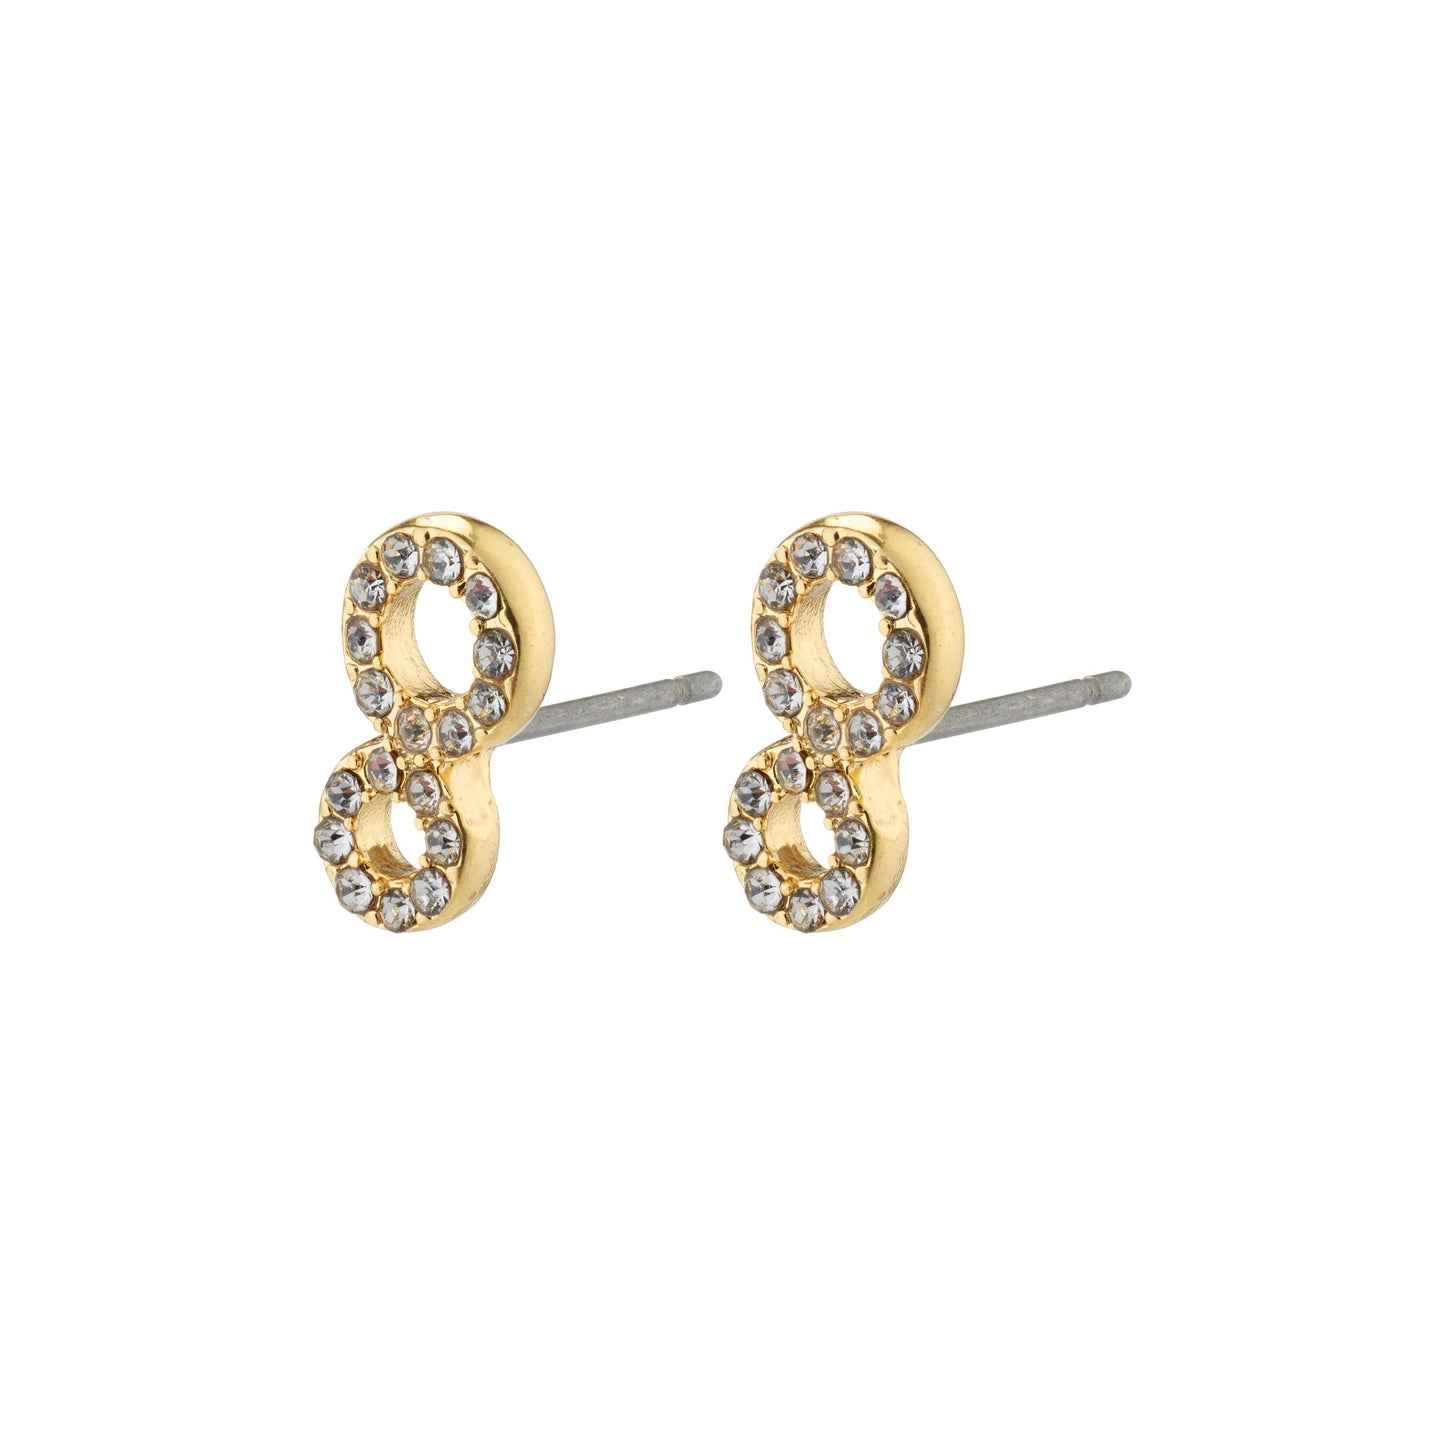 Rogue Earrings - Gold Plated